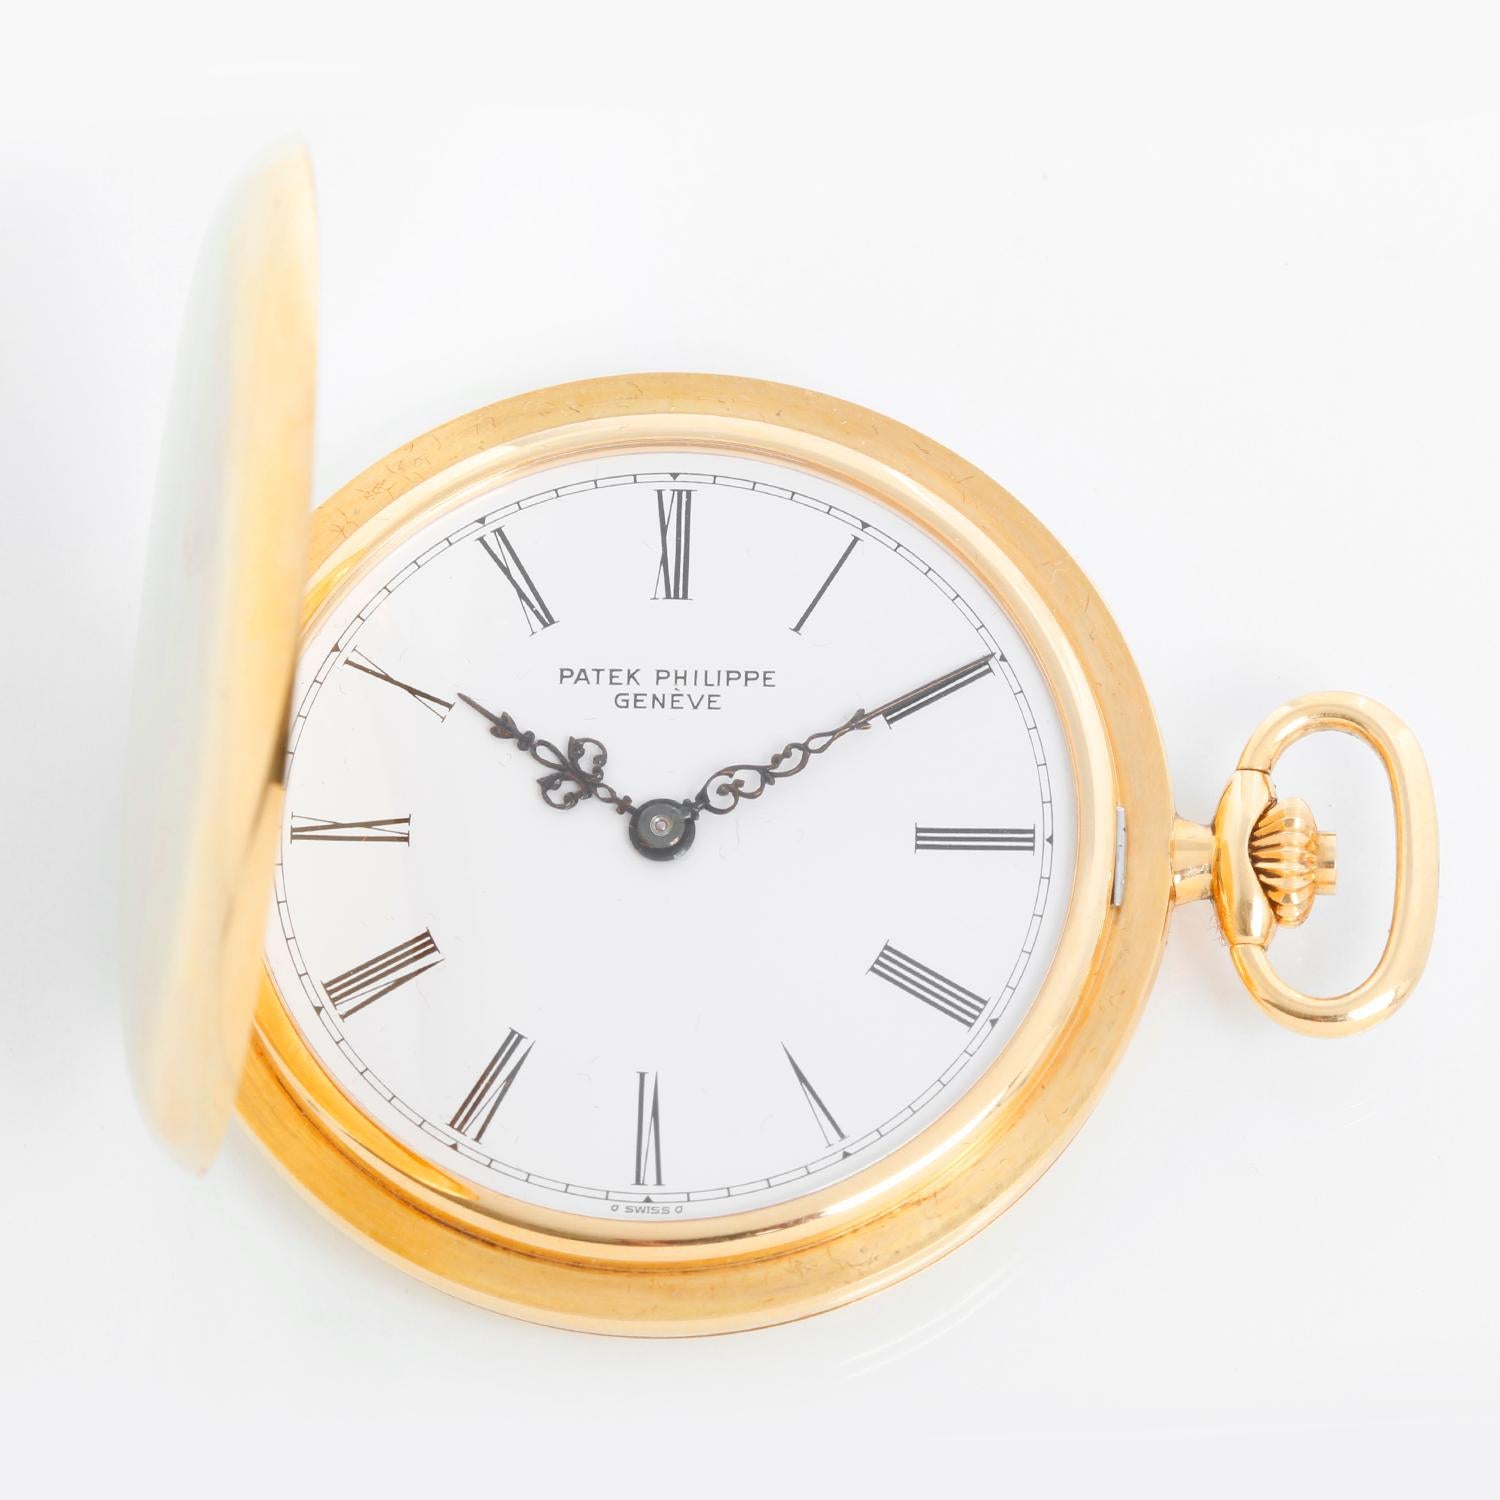 Patek Philippe 18K Yellow Gold Hunter Case Pocket Watch Ref 865 - Manual winding. 18K Yellow gold (48 mm) . White enamel dial with skinny roman numerals.  Ref. 865 was produced from 1969 until the early 1990s.